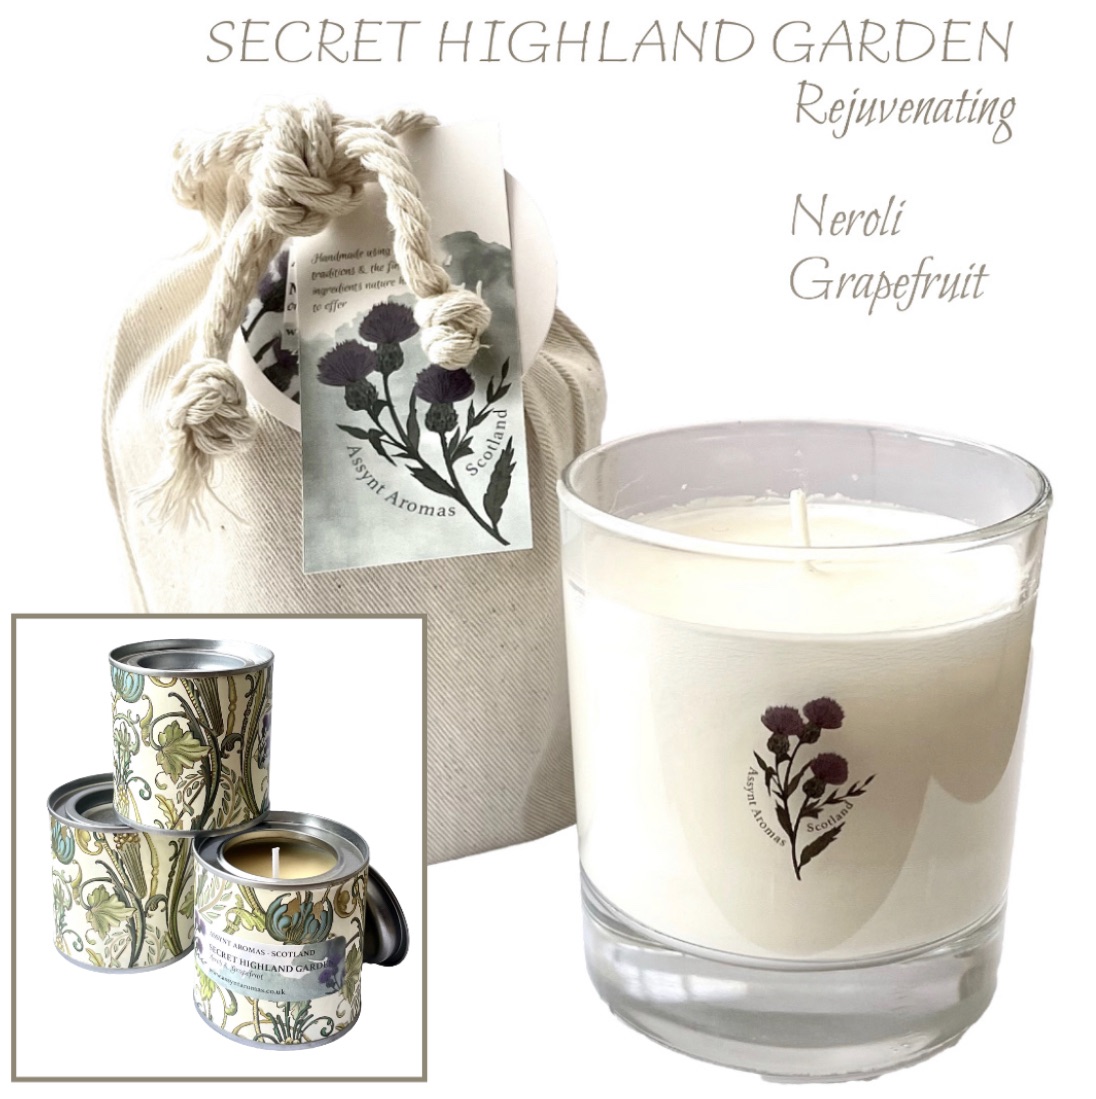 SECRET HIGHLAND GARDEN - natural essence aromatherapy plant wax candle with essential oil of neroli & grapefruit